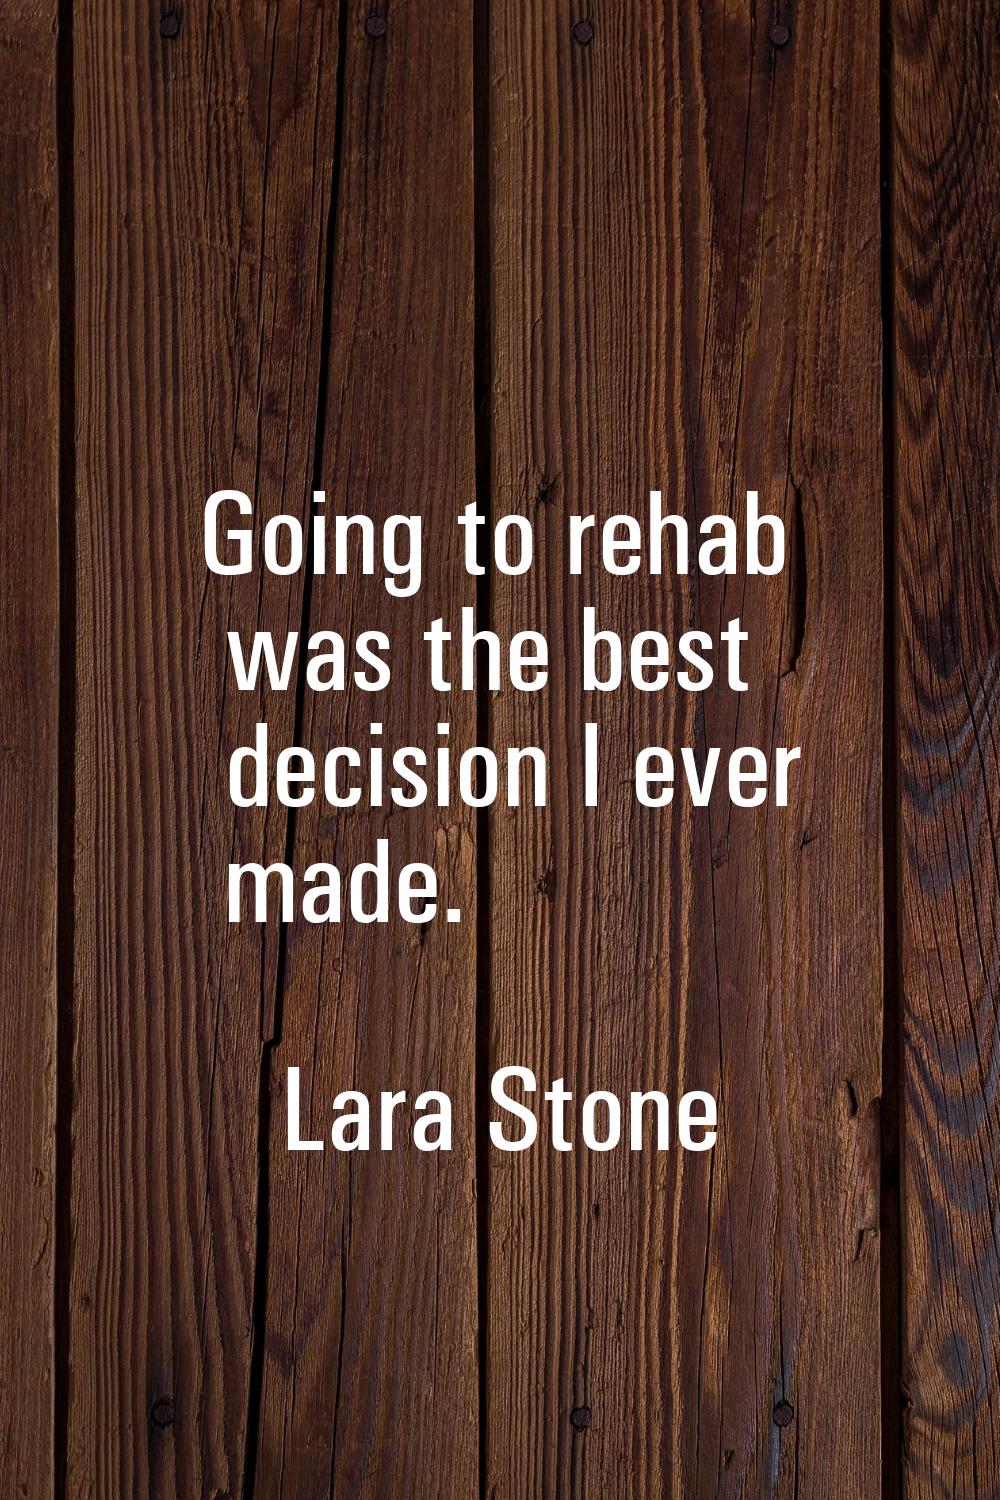 Going to rehab was the best decision I ever made.